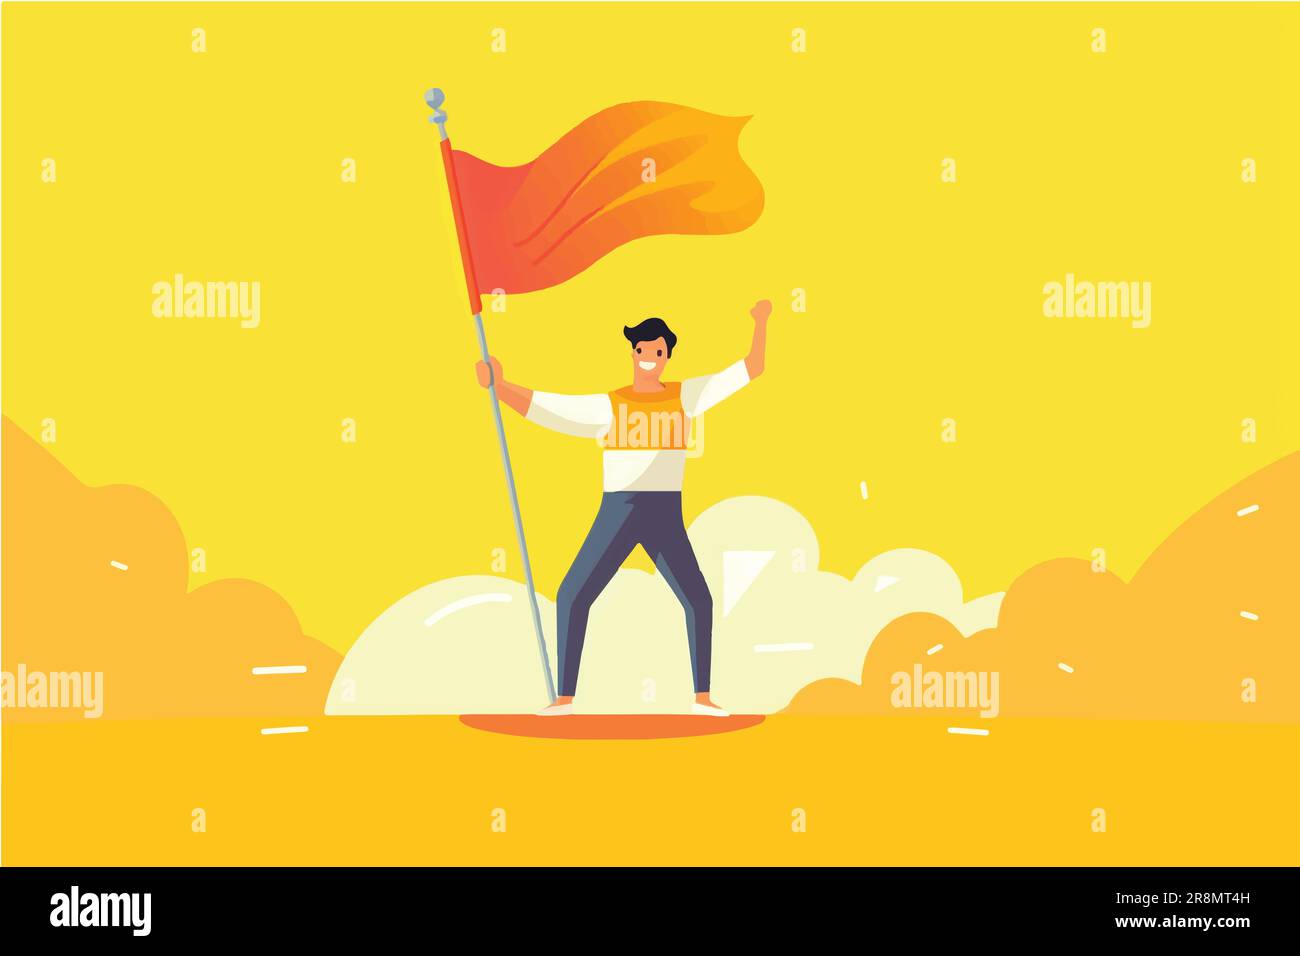 cartoon vector illustration of Goal-Getter, Smiling man on graph triumphs with yellow flag in hand Stock Vector